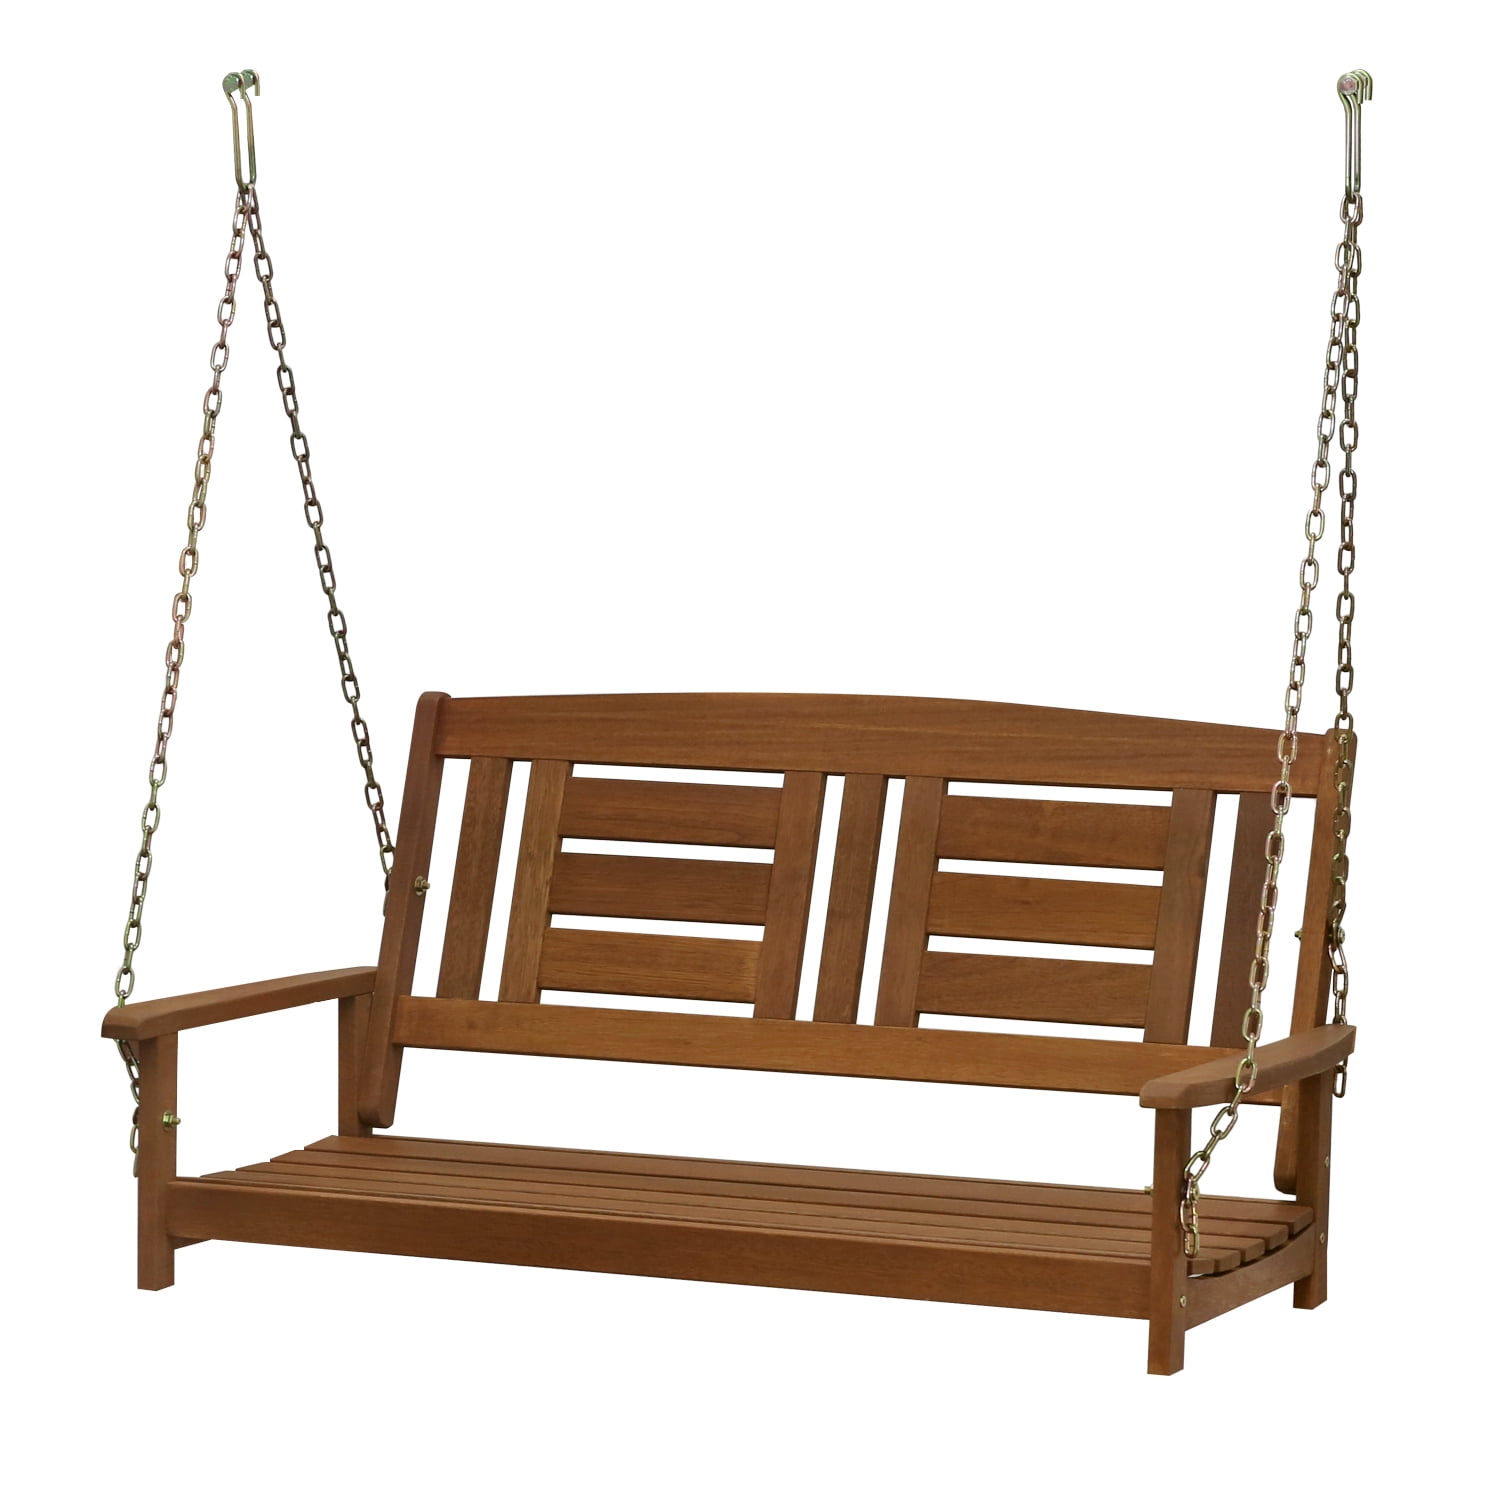 Wooden Porch Swing Natural Wood Patio Outdoor Yard Garden Bench Hanging W/Chains 